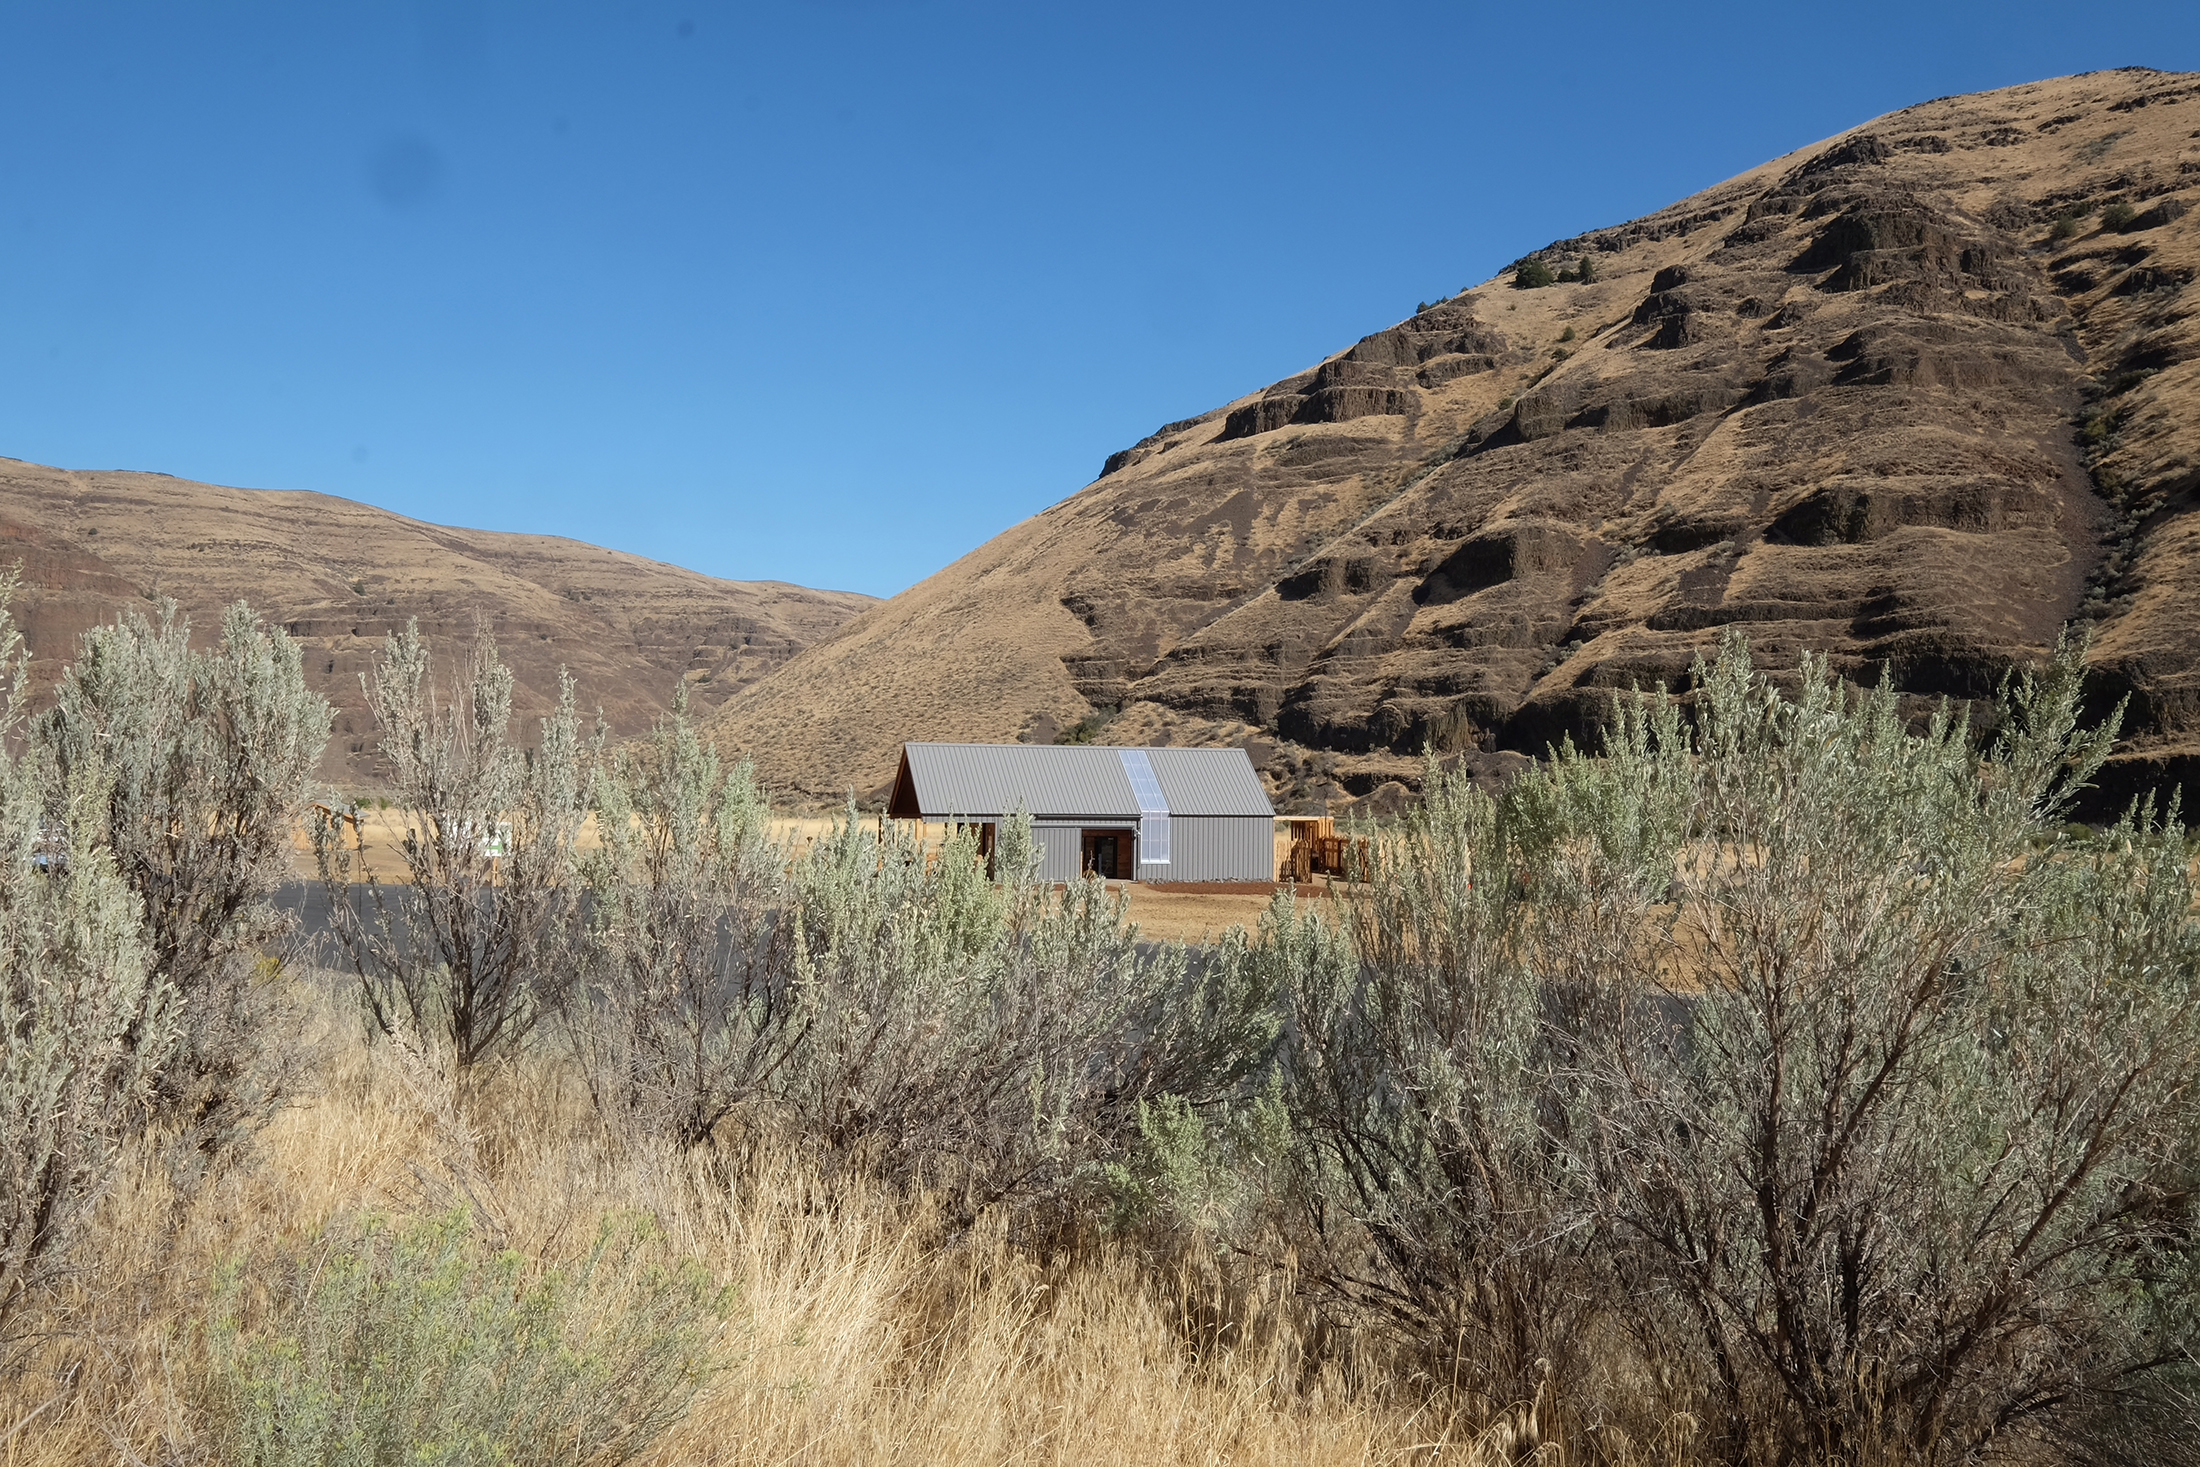 Cottonwood Canyon Experience Center is a multi-use facility that serves the John Day River valley in eastern Oregon. Photo provided by Signal Architecture + Research.